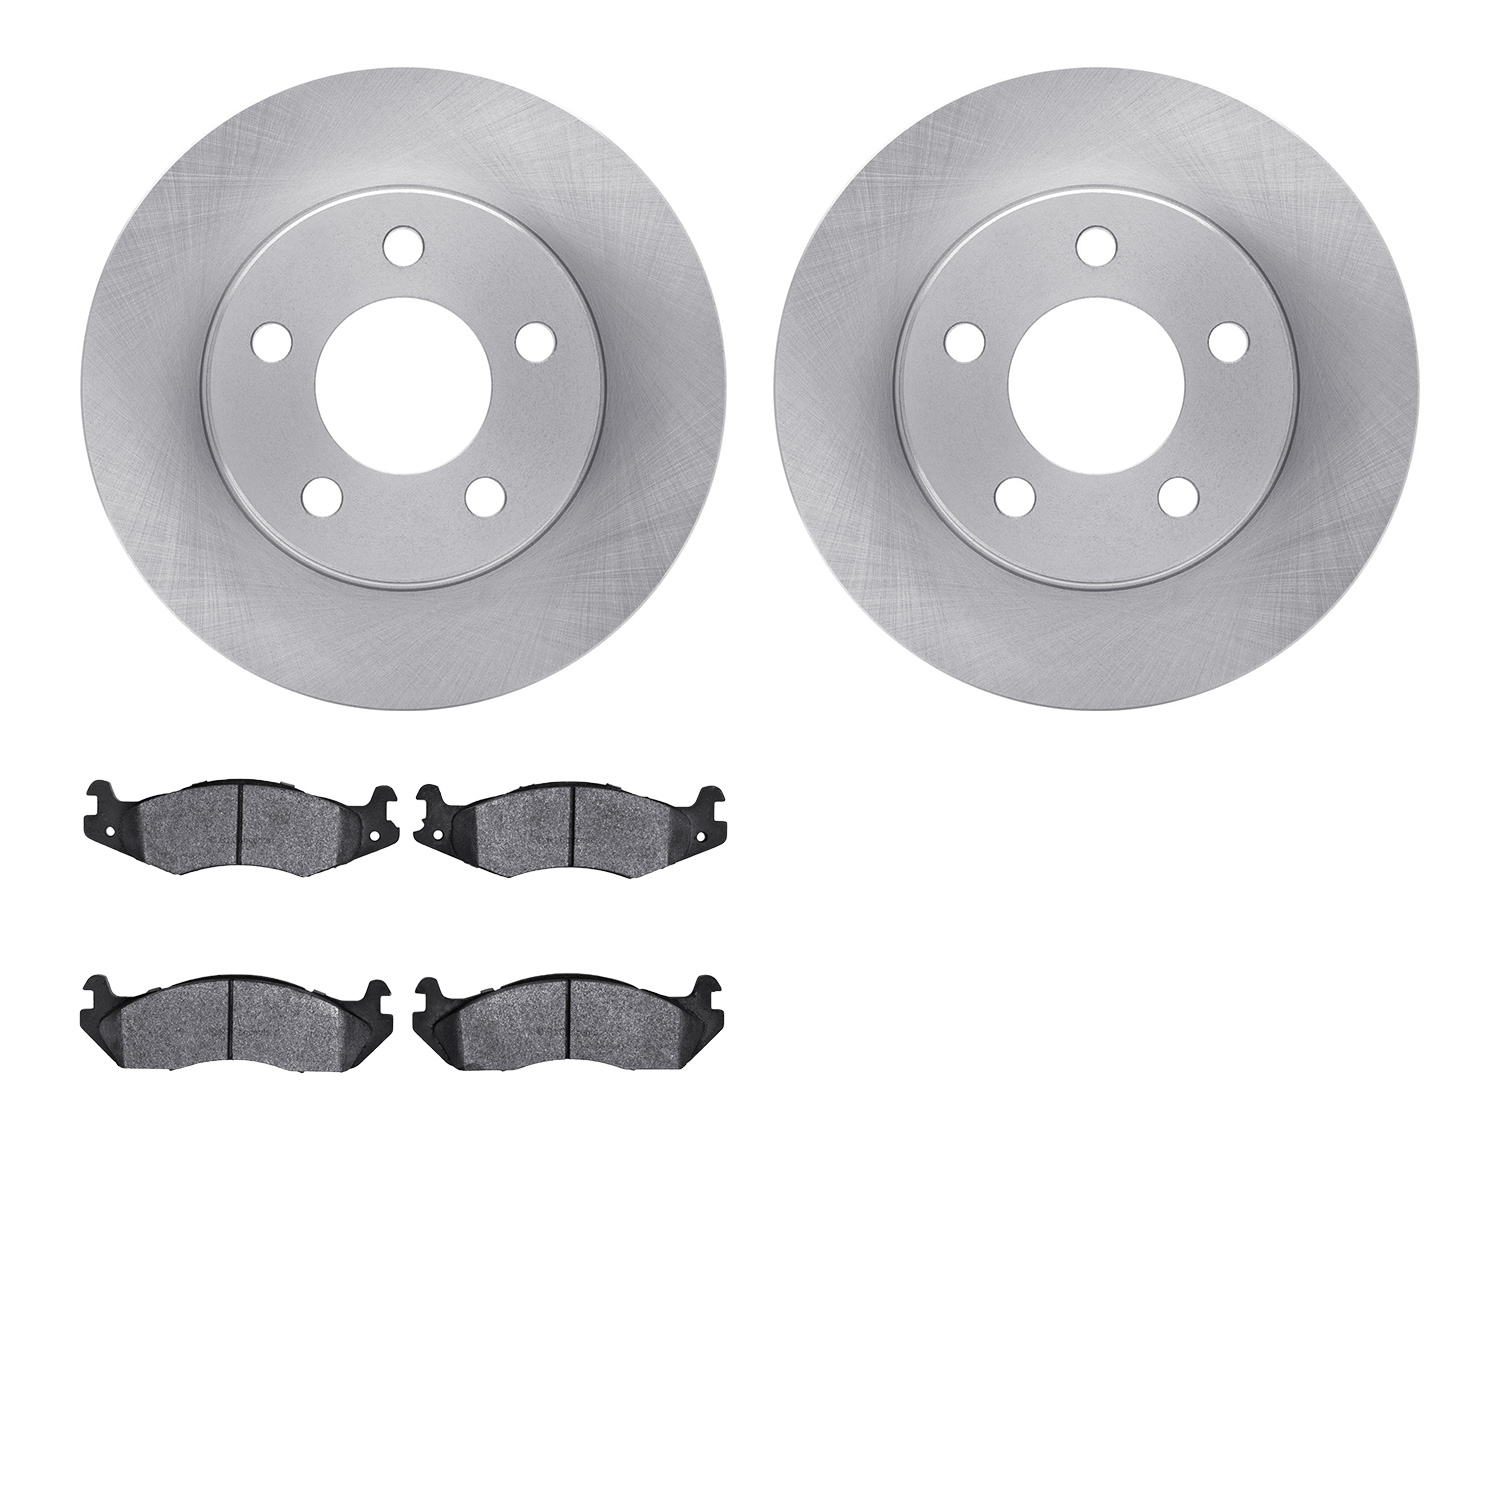 6402-42047 Brake Rotors with Ultimate-Duty Brake Pads, 1982-1989 Multiple Makes/Models, Position: Front